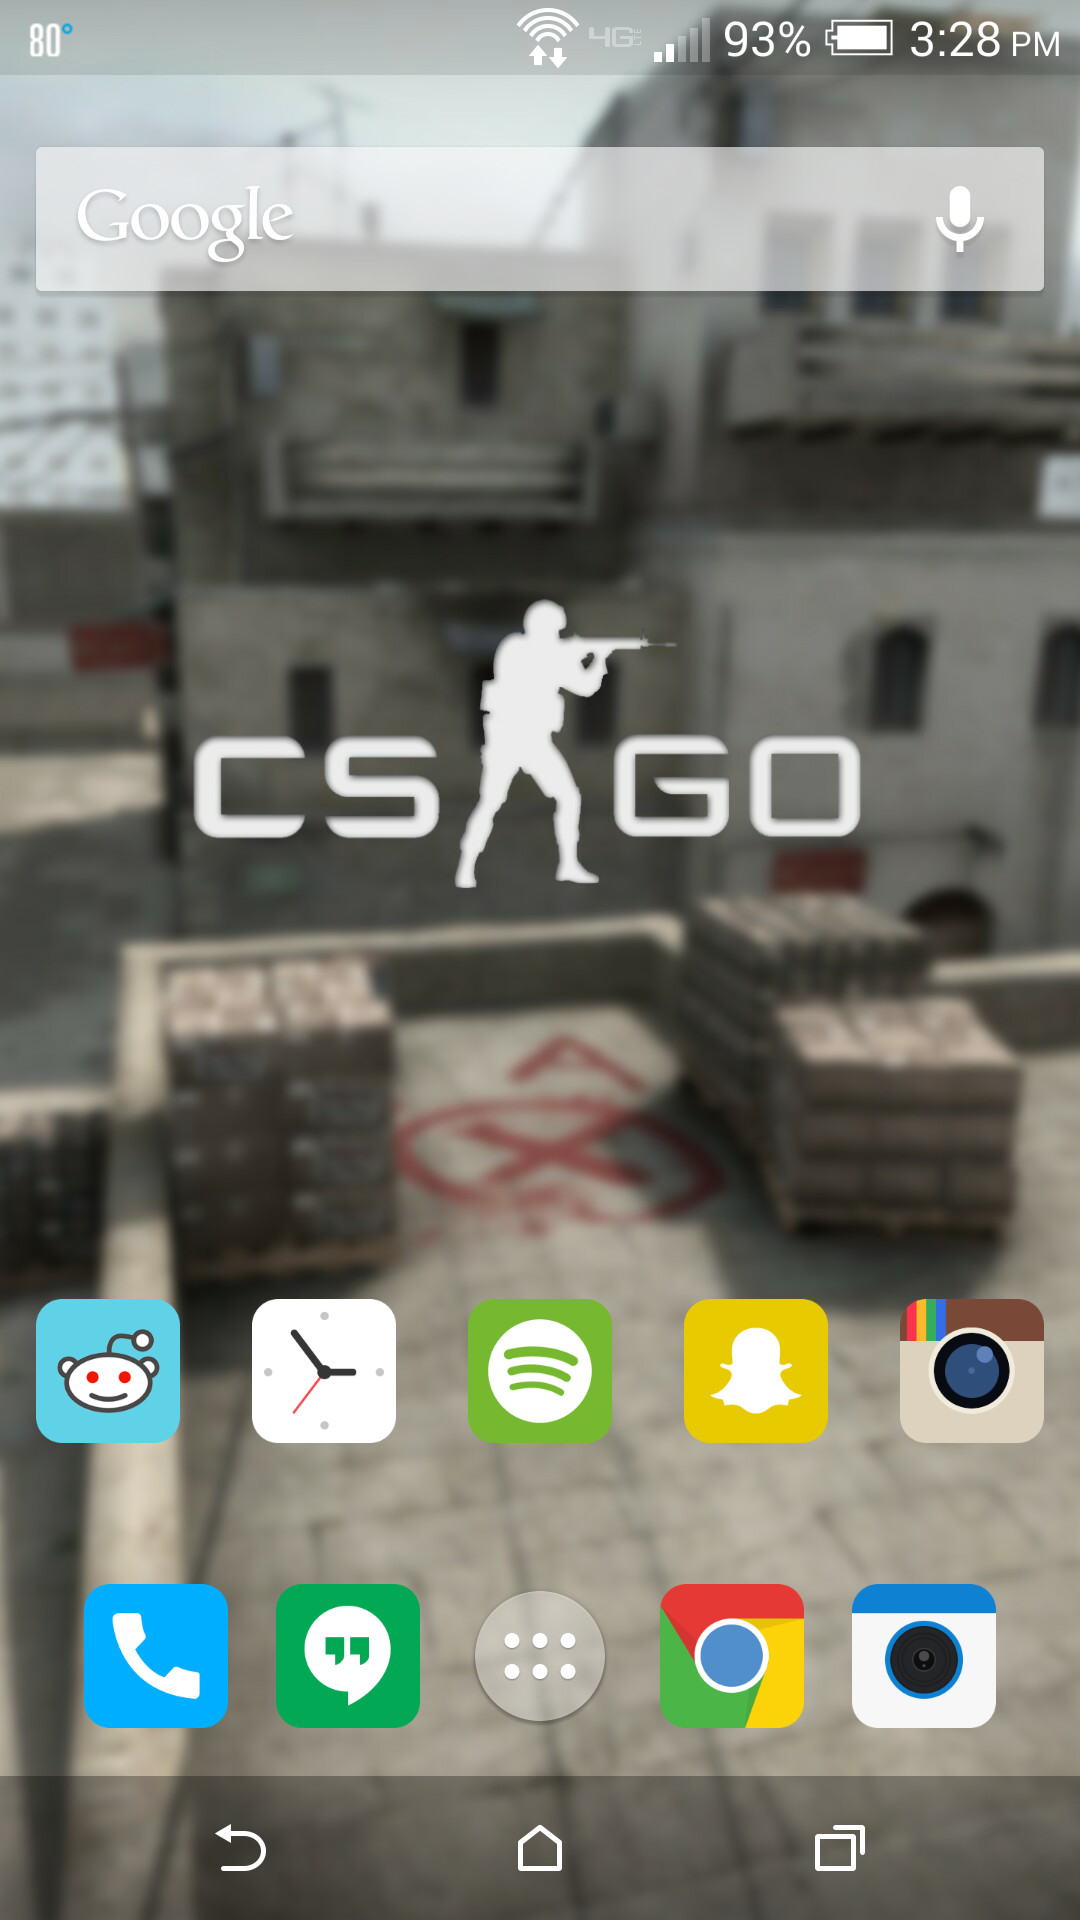 Couldn't find a god CSGO phone wallpaper so I made one. DL link in comments  if you want it.